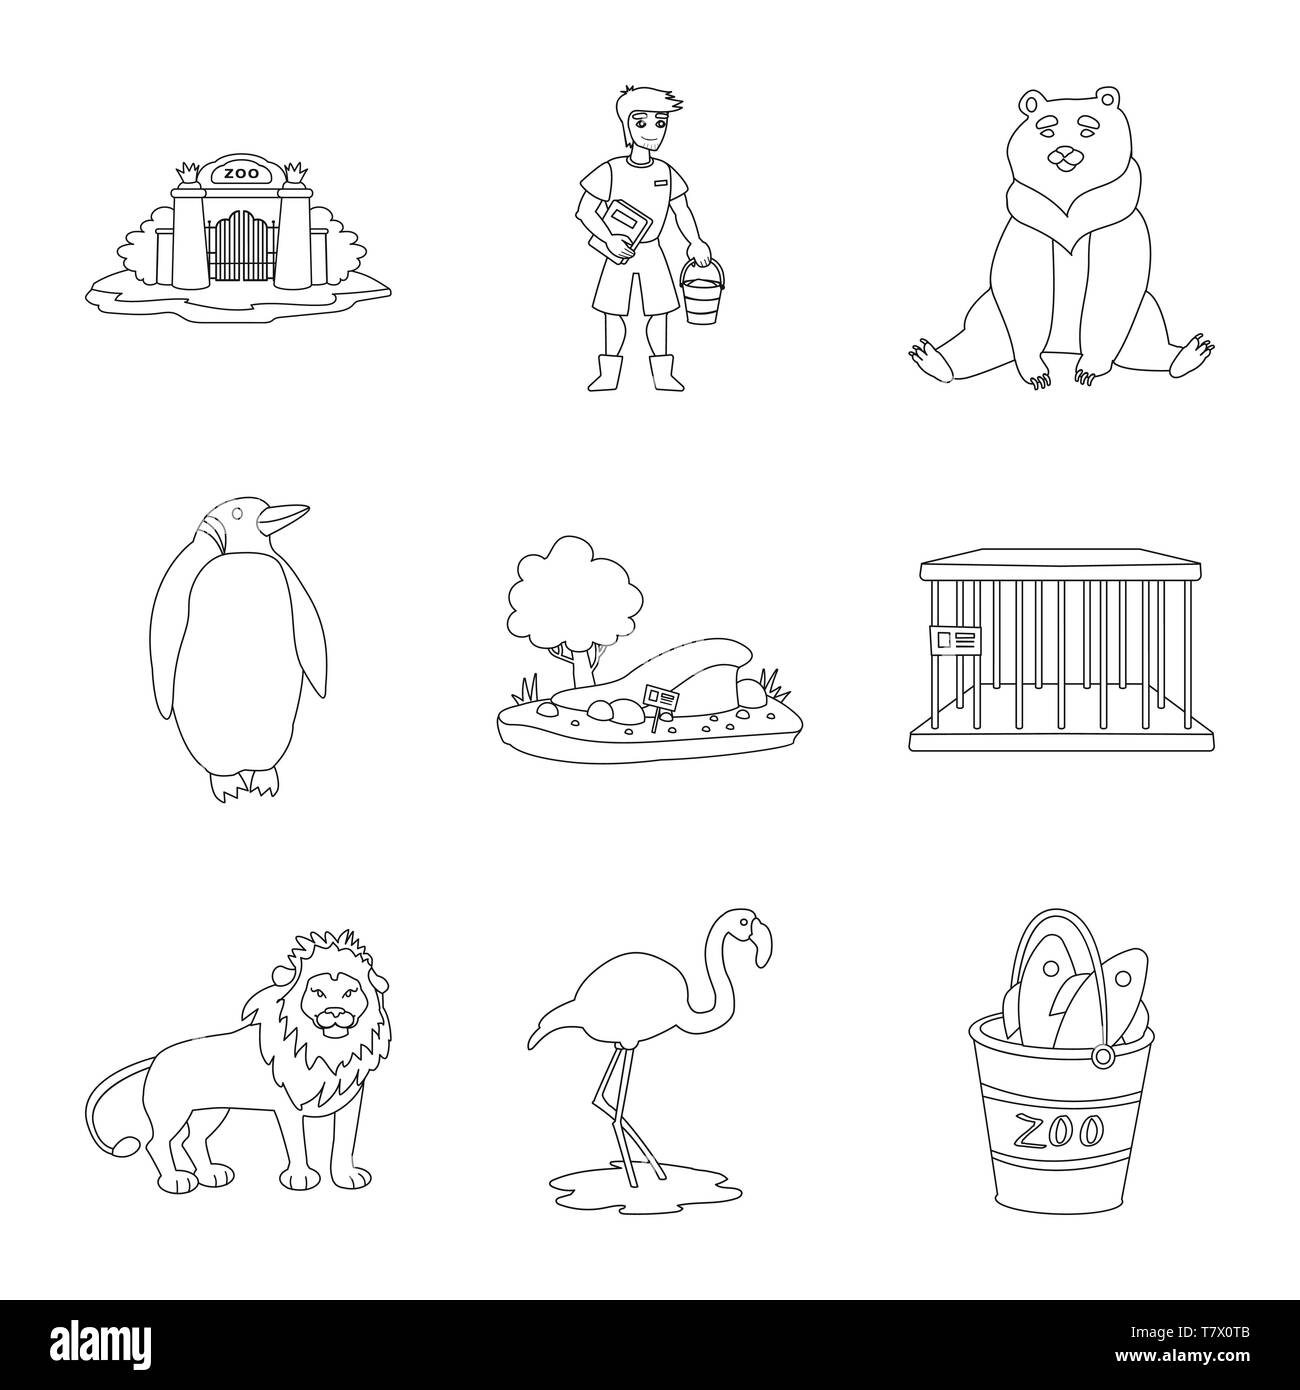 gate,zookeeper,bear,penguin,trees,cell,lion,flamingo,bucket,arch,man,brown,white,sand,empty,cute,pink,fish,exit,keeper,sleep,north,mound,jail,jungle,funny,crucian,open,entertainment,forest,zoo,park,safari,animal,nature,fun,fauna,flora,set,vector,icon,illustration,isolated,collection,design,element,graphic,sign,outline,line Vector Vectors , Stock Vector